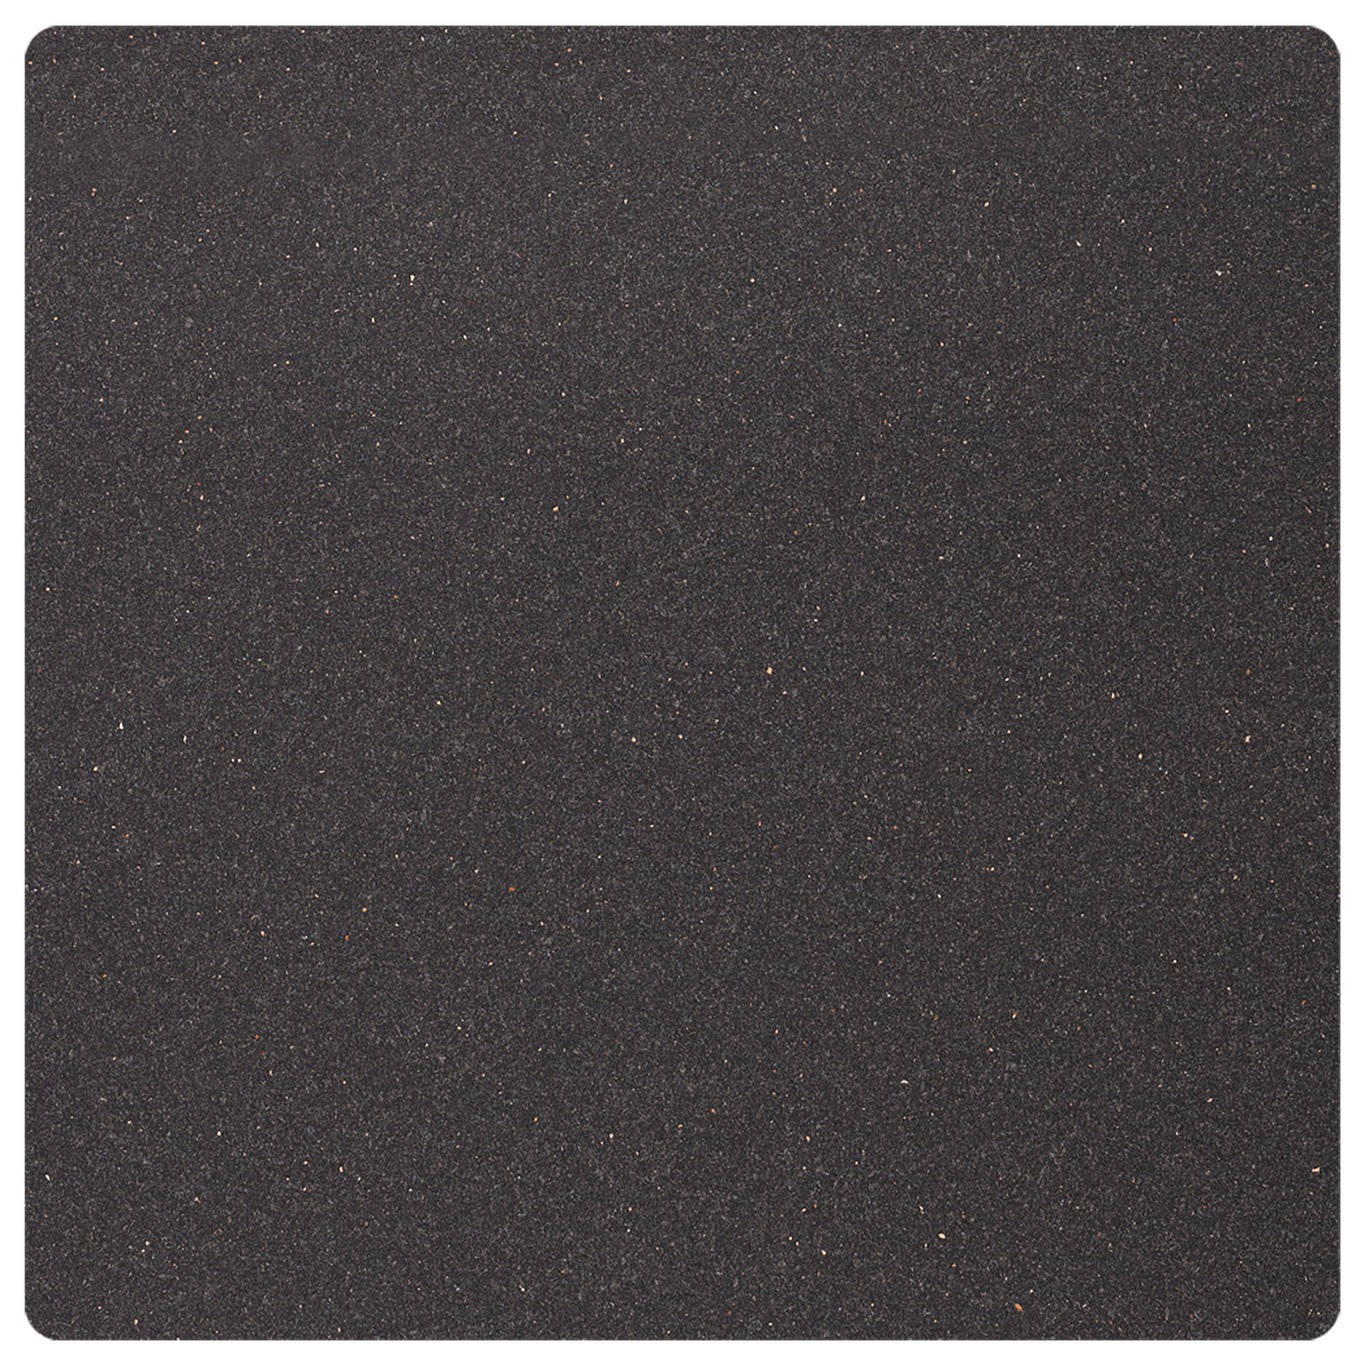 Square S Placemat Core 28x28 cm, Flecked Anthracite